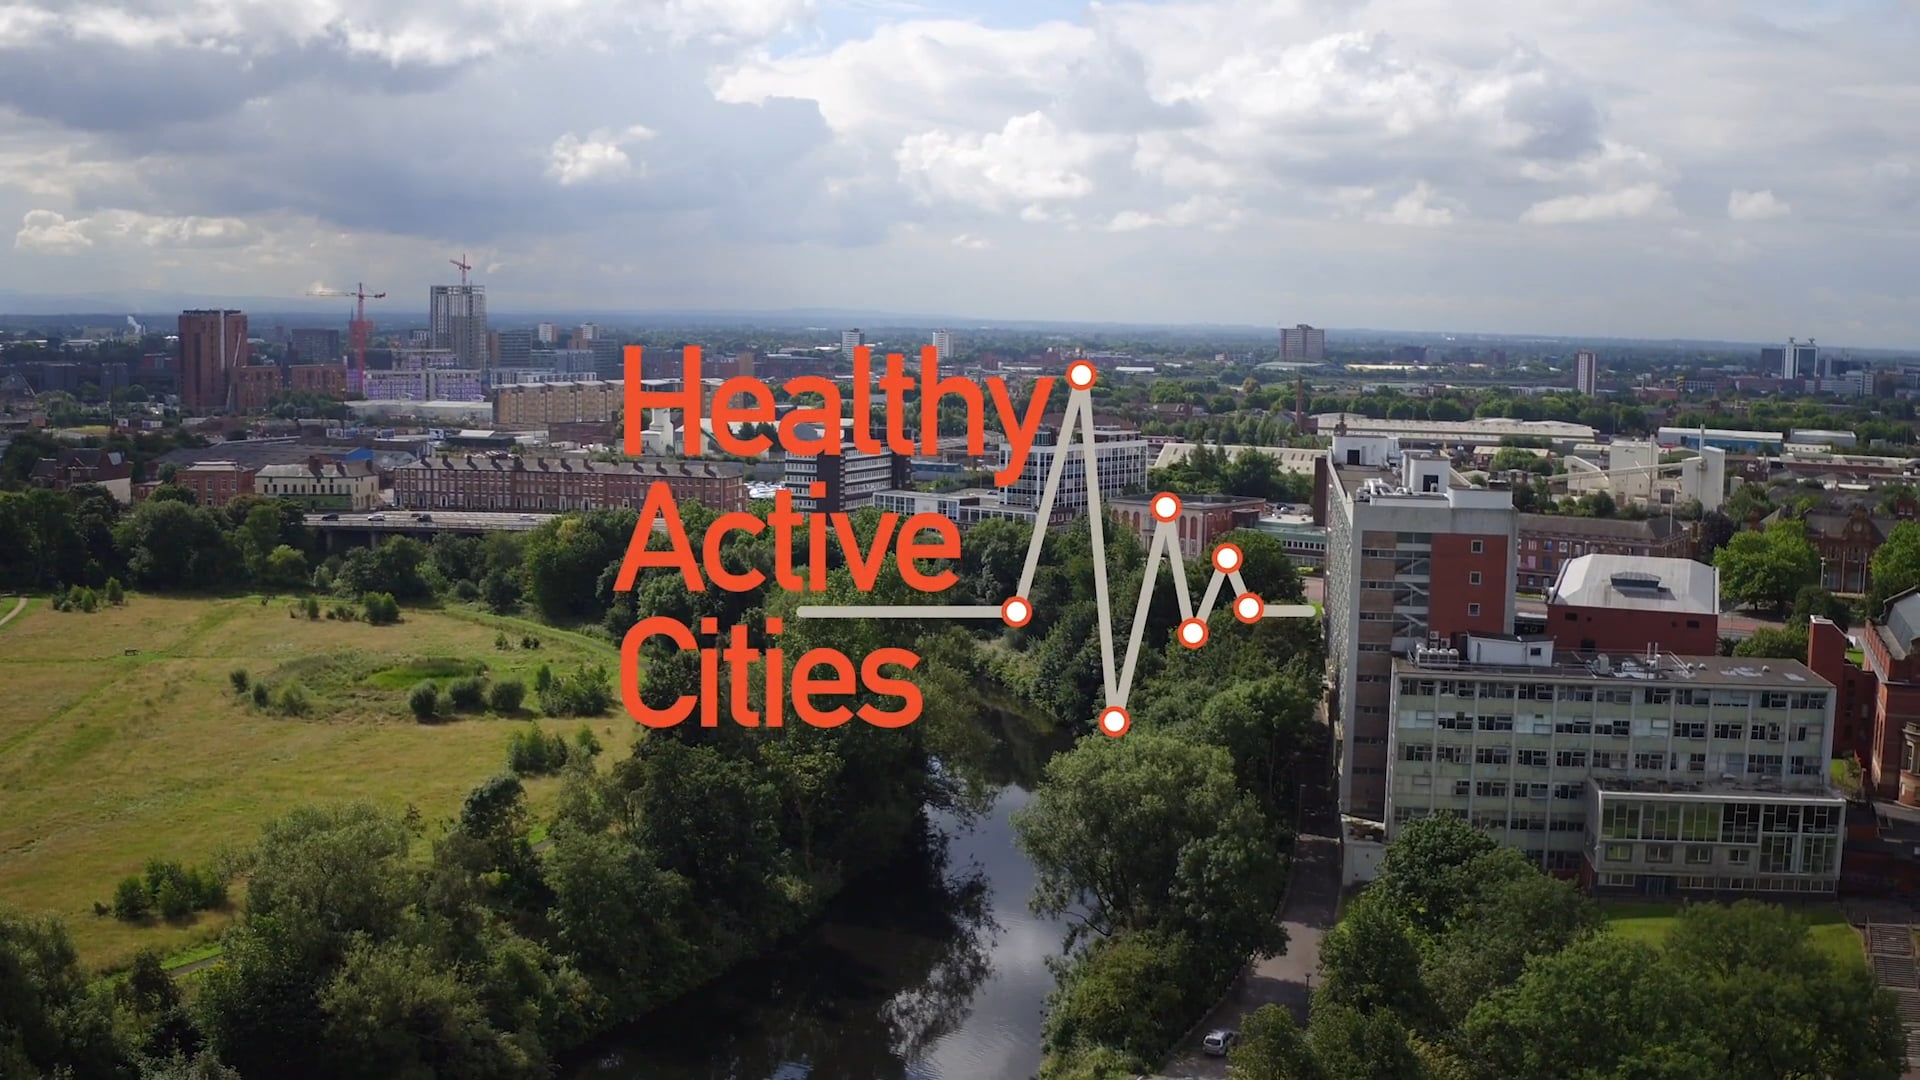 Research at Salford: Healthy Active Cities